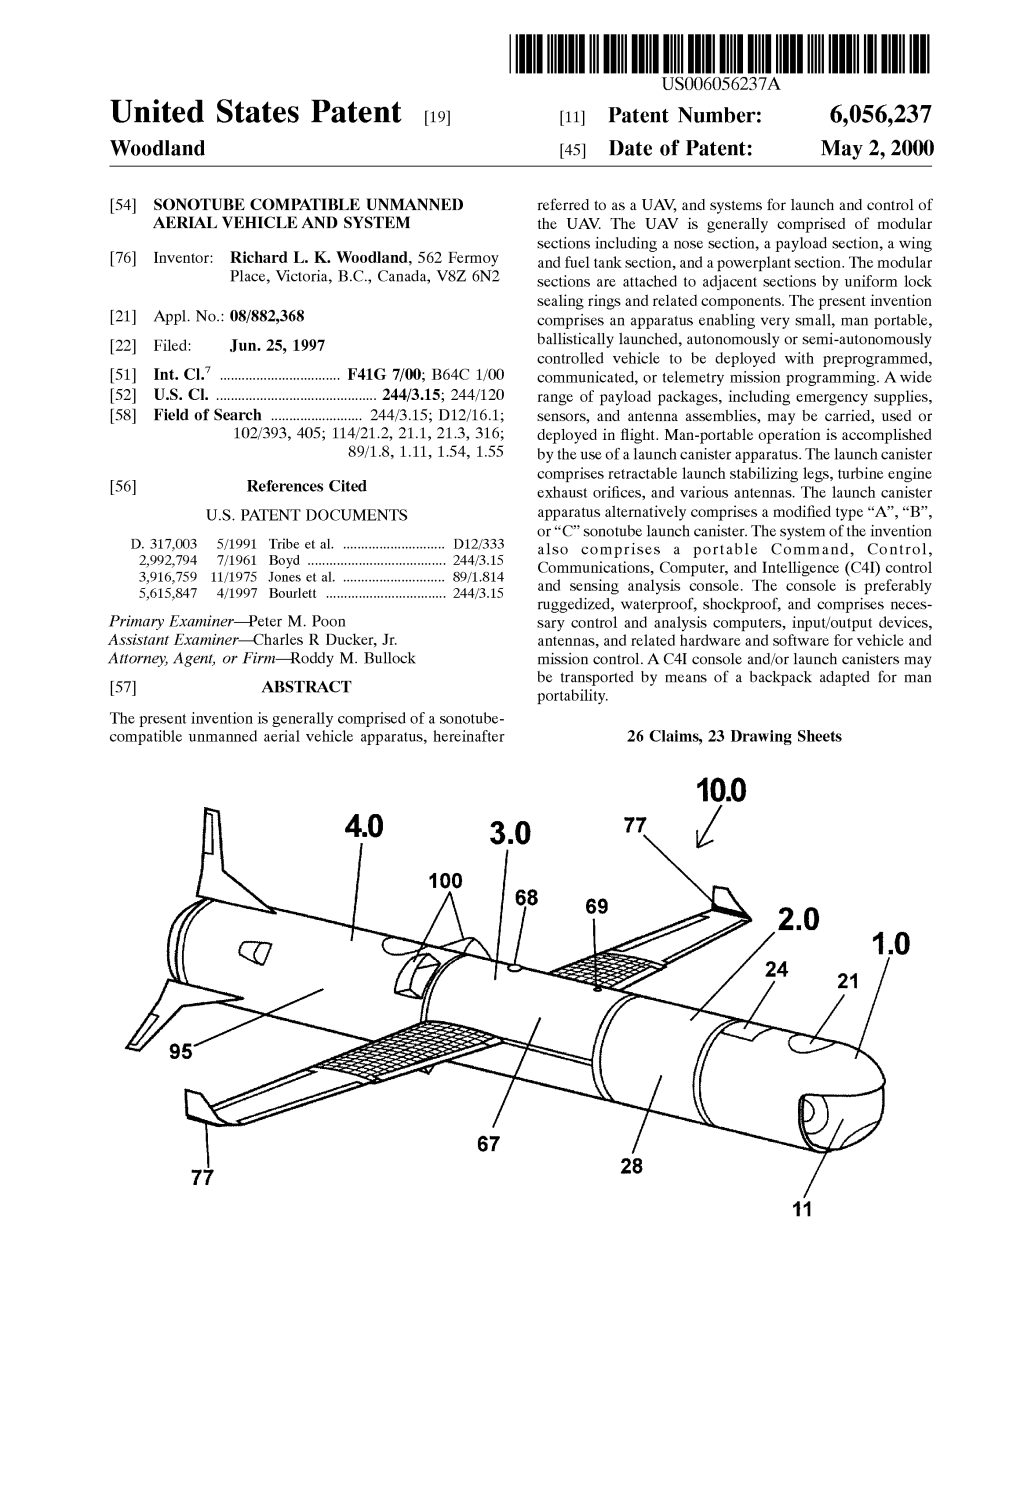 United States Patent (19) 11 Patent Number: 6,056,237 Woodland (45) Date of Patent: May 2, 2000